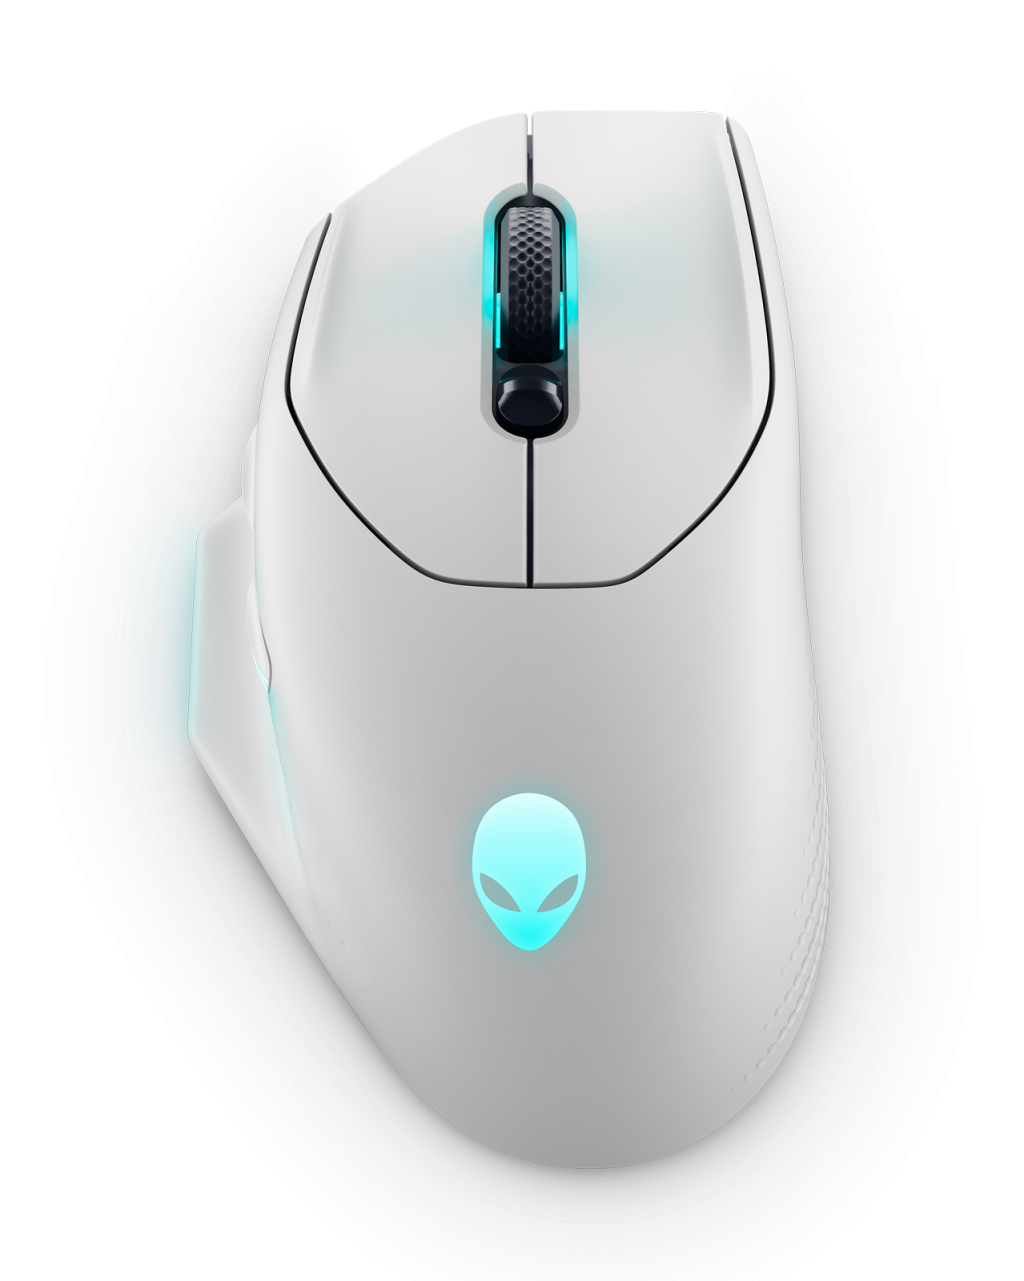 nghe_nhin_dell_alienware_a9.png (1.48 MB)